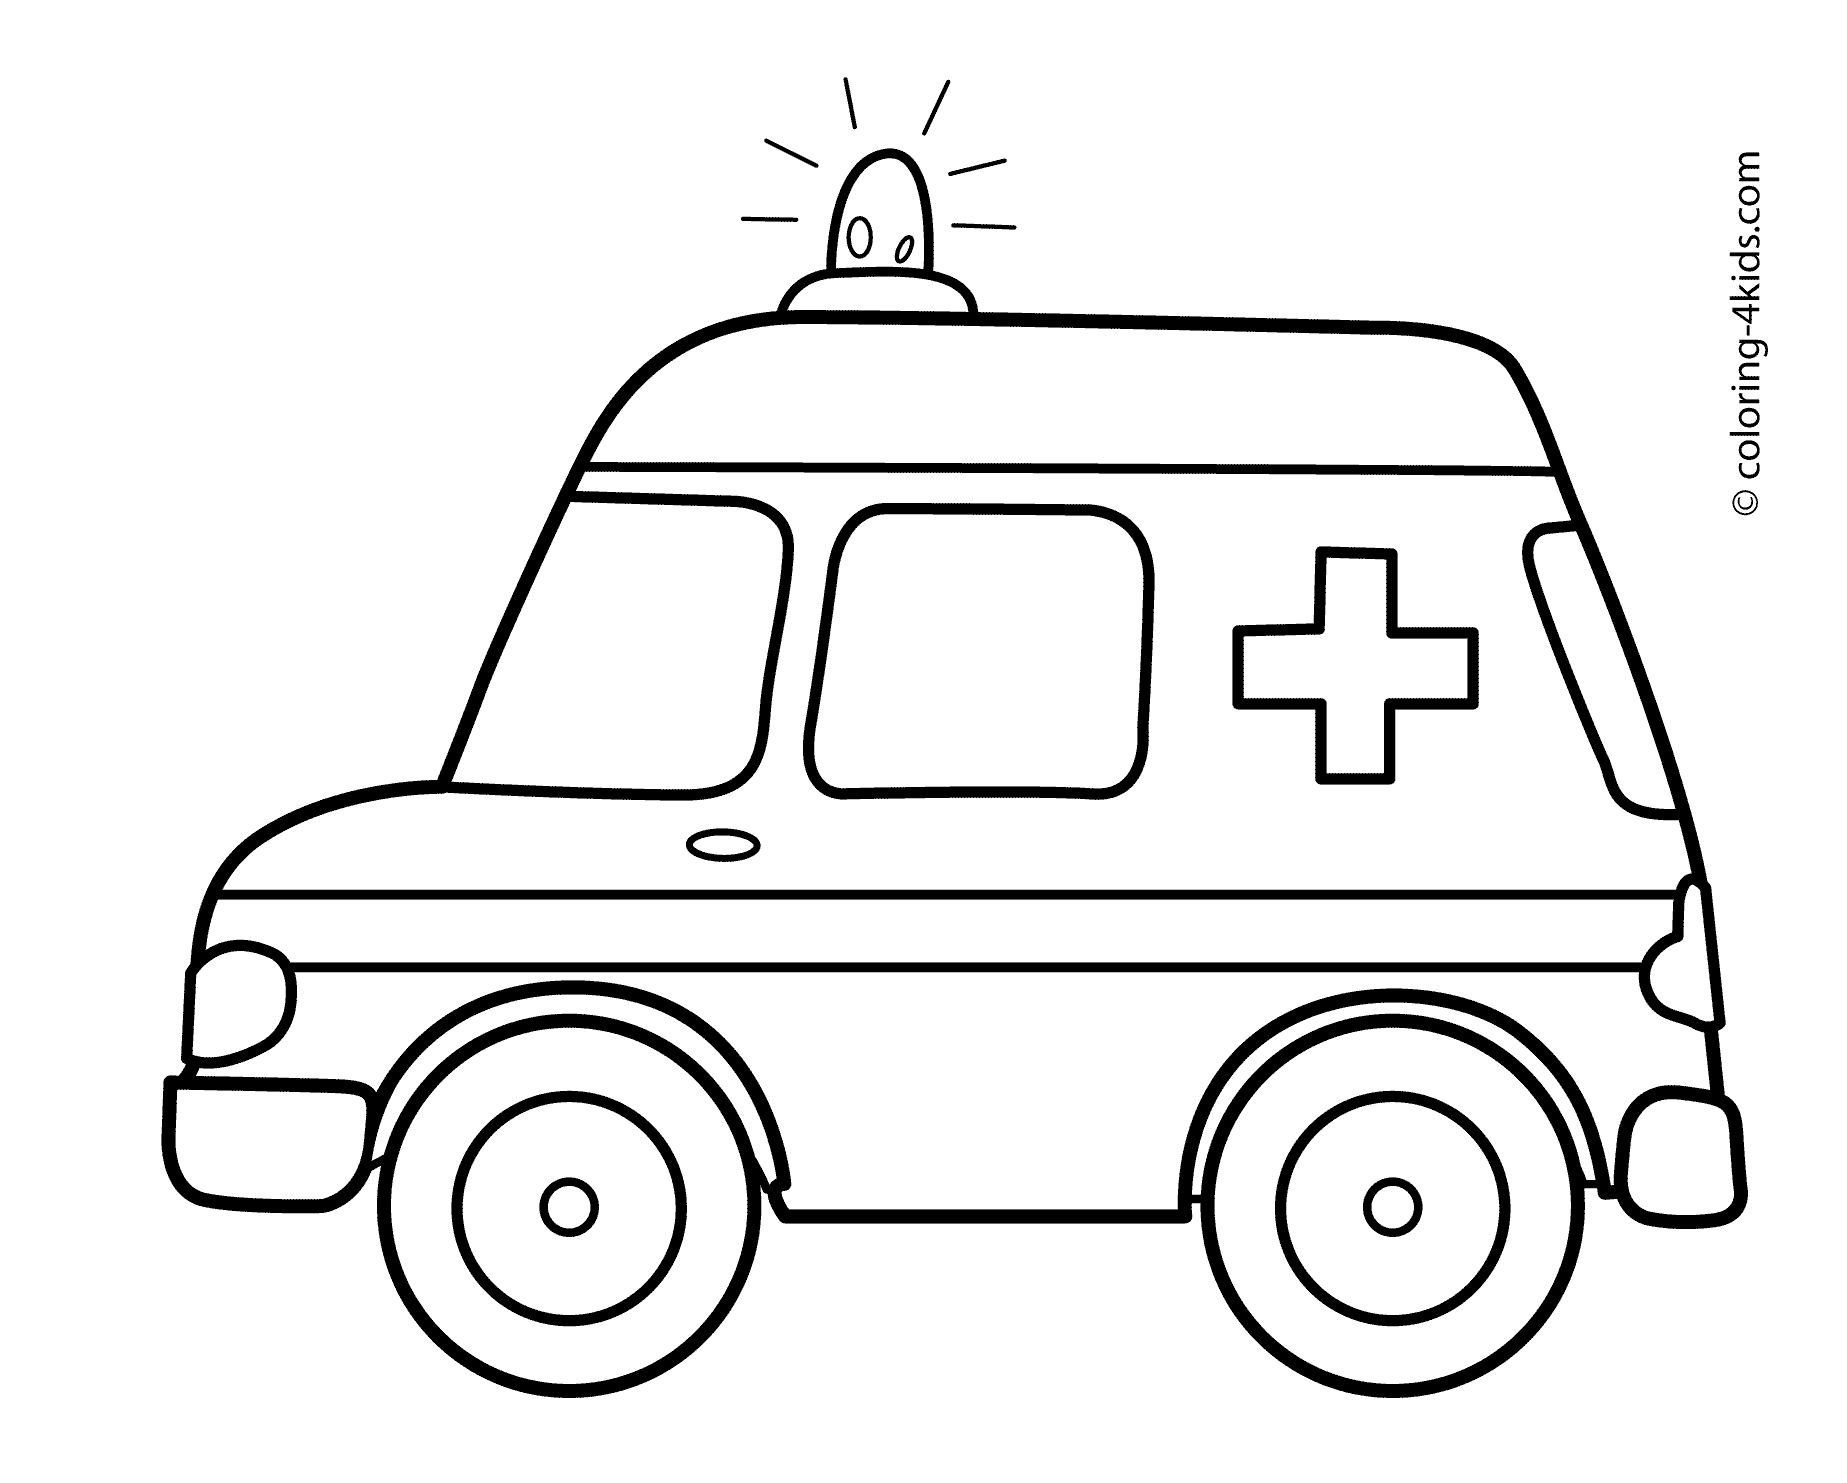 Ambulance coloring pages to download and print for free